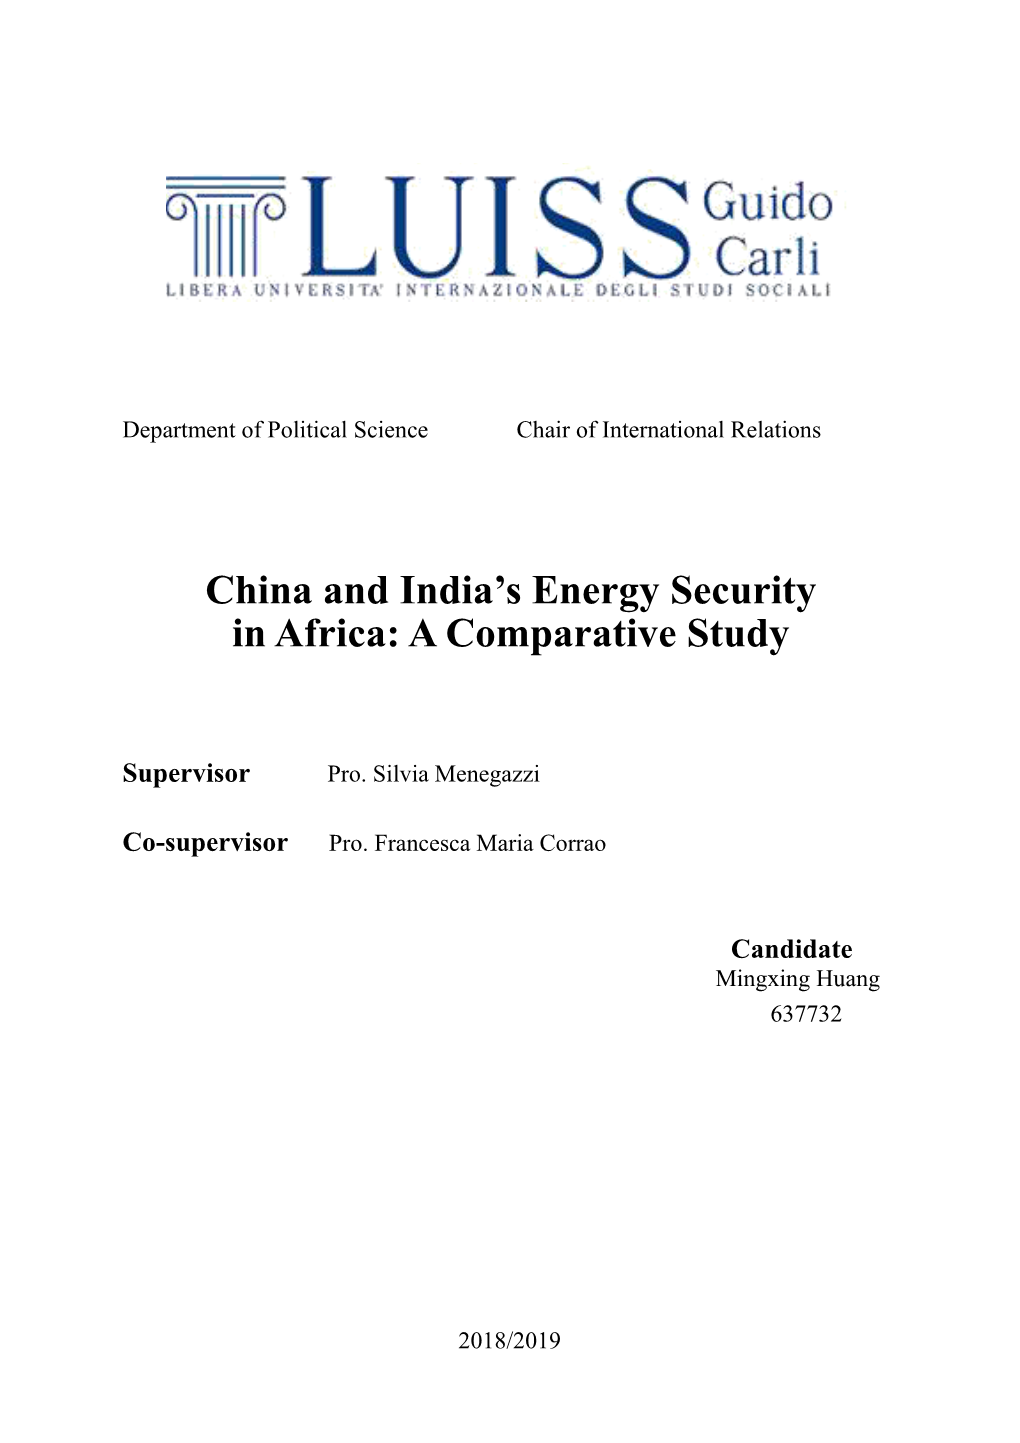 China and India's Energy Security in Africa: a Comparative Study